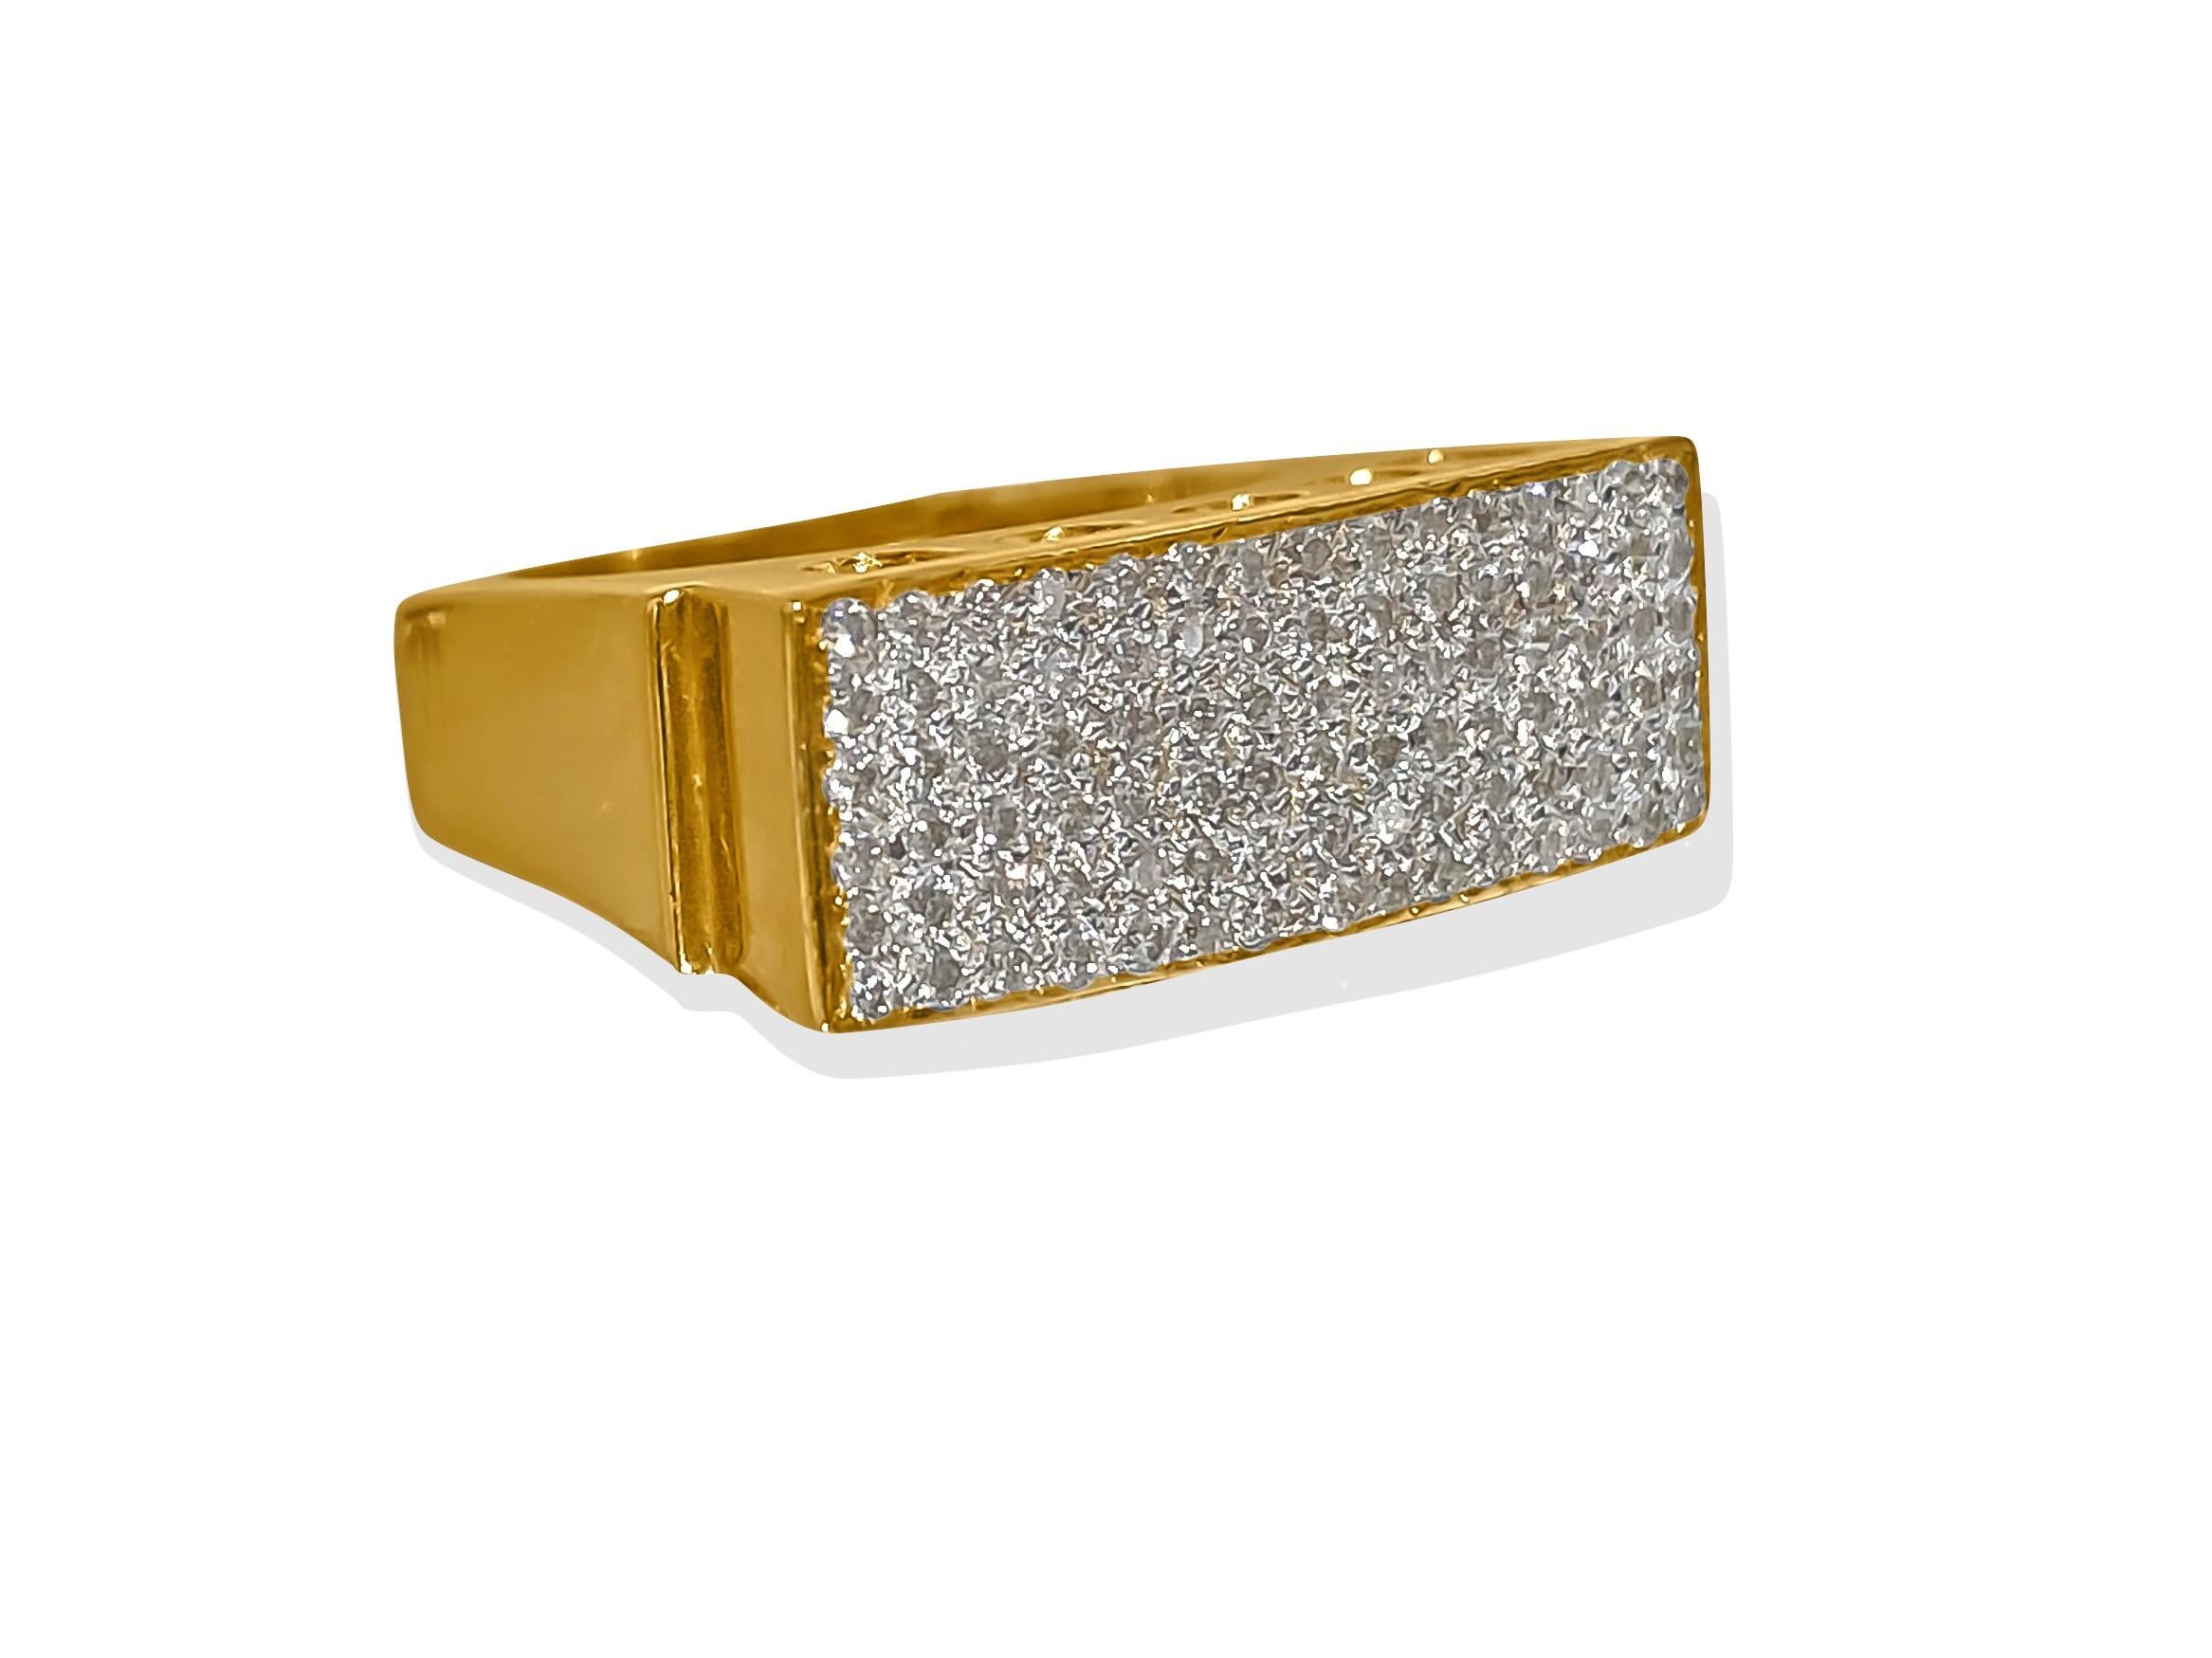 Metal: 18K Yellow Gold. 
Total carat weight of white diamonds: 3.00 carats. VS-SI clarity. F color. Round brilliant cut diamonds. Bead setting. Custom made piece. All diamonds are 100% natural earth mined. 
Ring size: US 6.50. Ring resizing